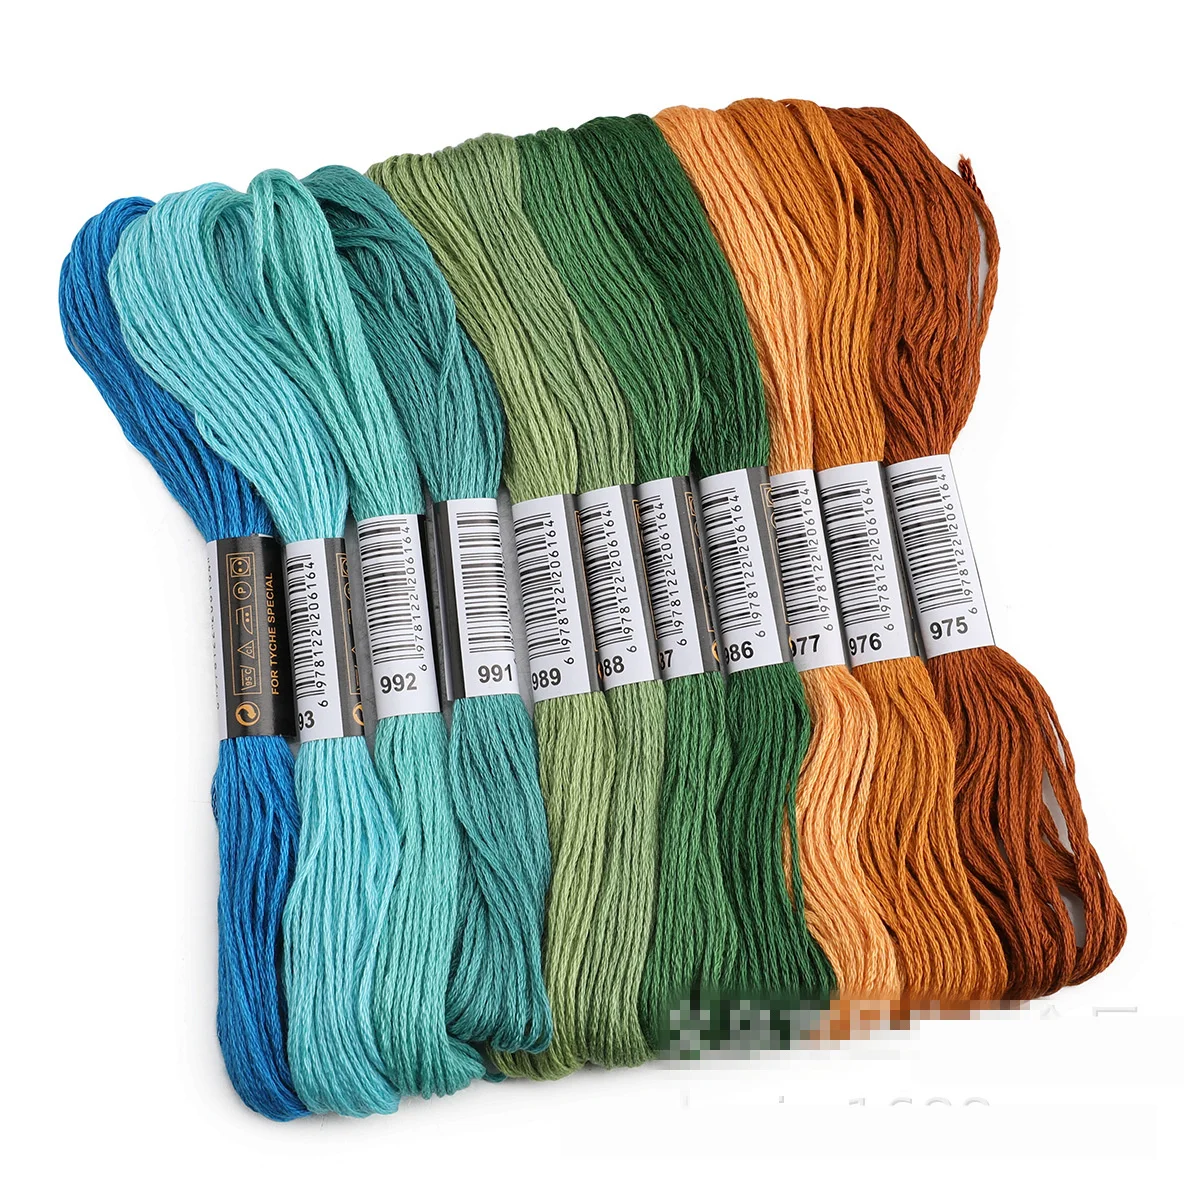 Choose 10pcs  CXC Threads Number Total 447 Skeins Thread your colors Embroidery Cross Stitch Floss